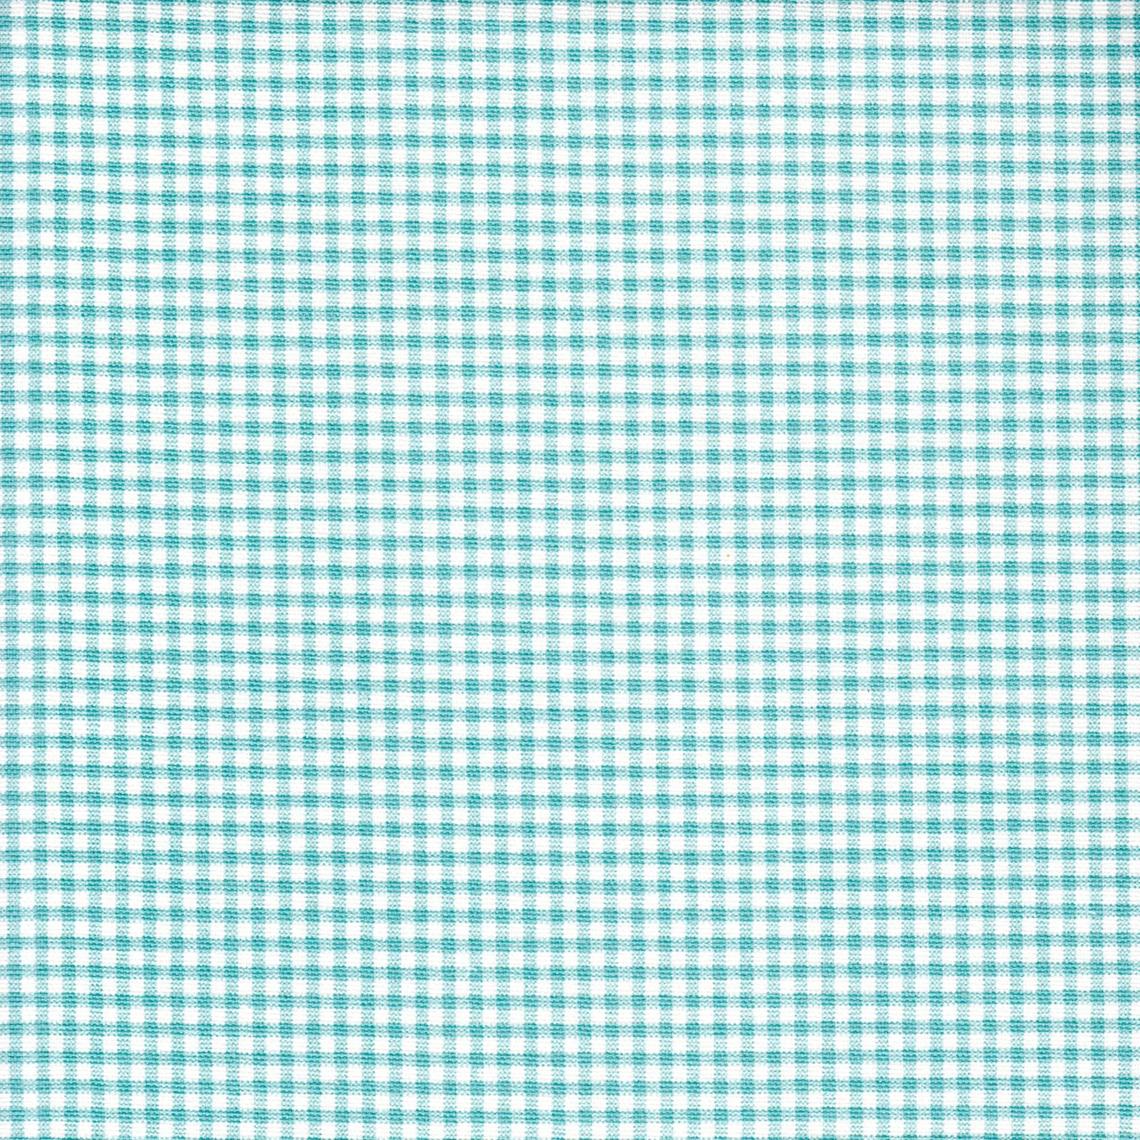 tailored tier cafe curtain panels pair in farmhouse turquoise blue gingham check on cream